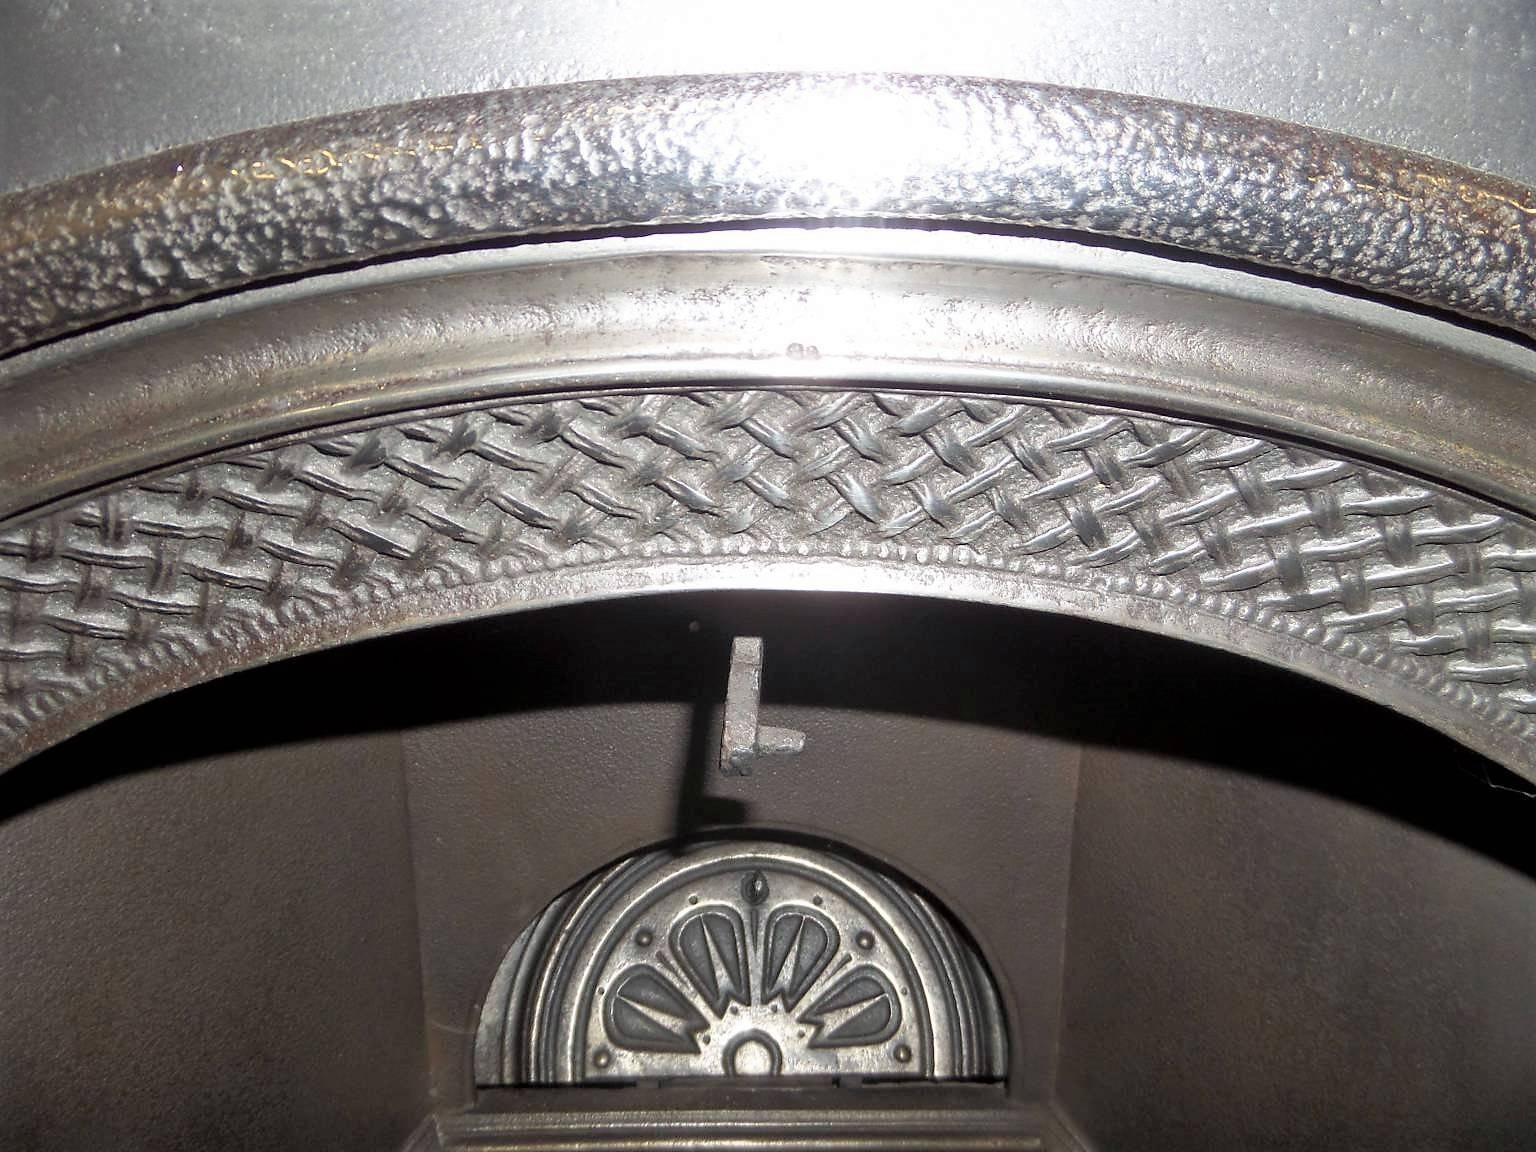 Antique Victorian arched highlighted fireplace insert. Finished in a traditional black polish and a clear semi polish on the pattern. Complete with a replacement fire back and damper plate, circa 1840.